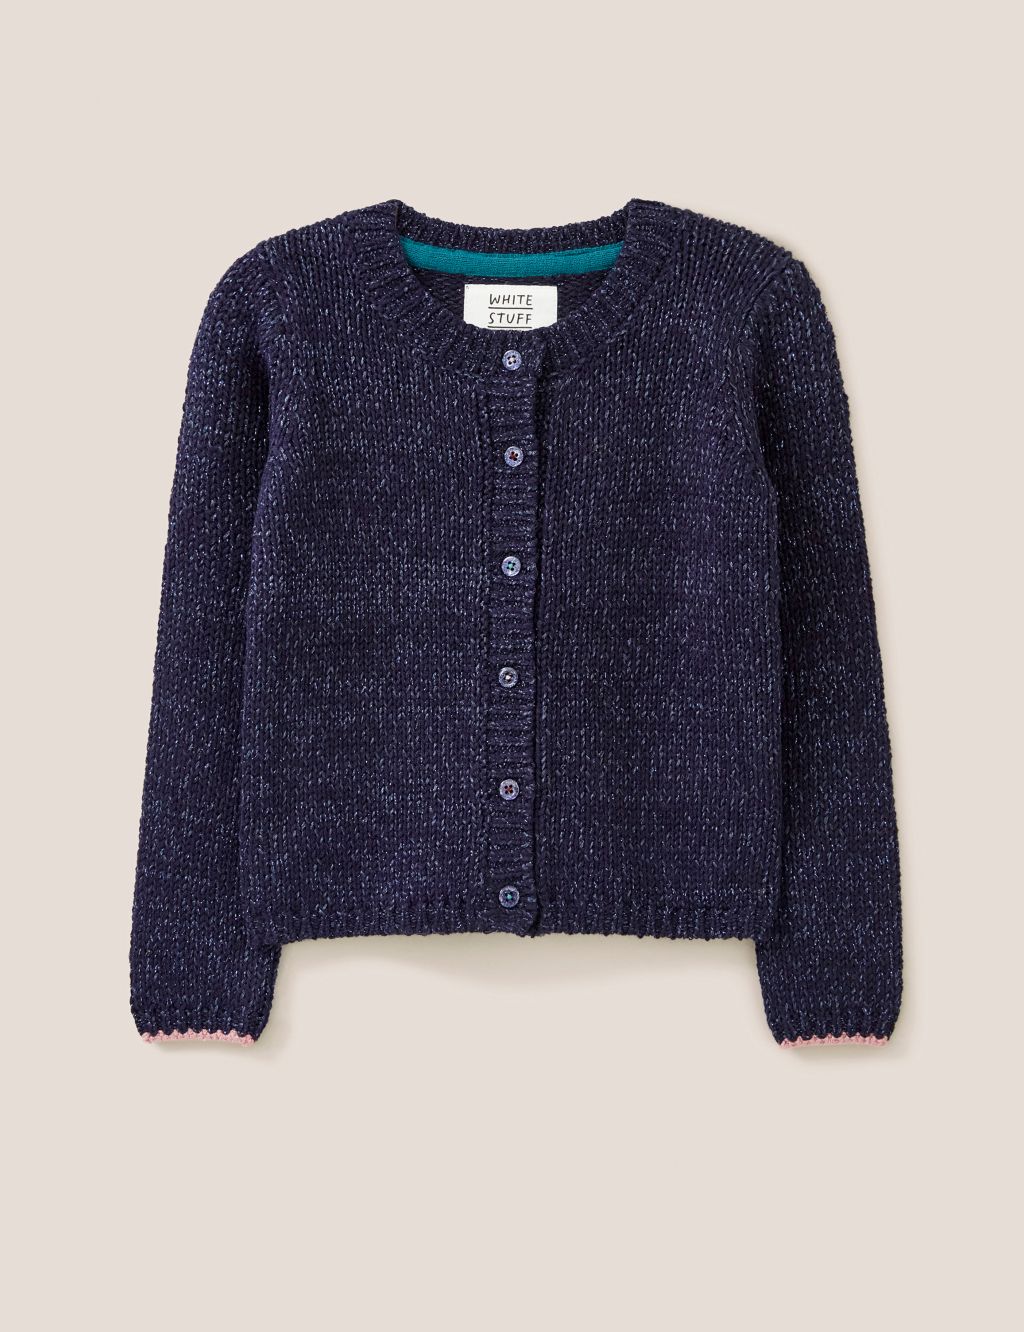 Sparkly Knitted Cardigan (3-10 Yrs) image 1